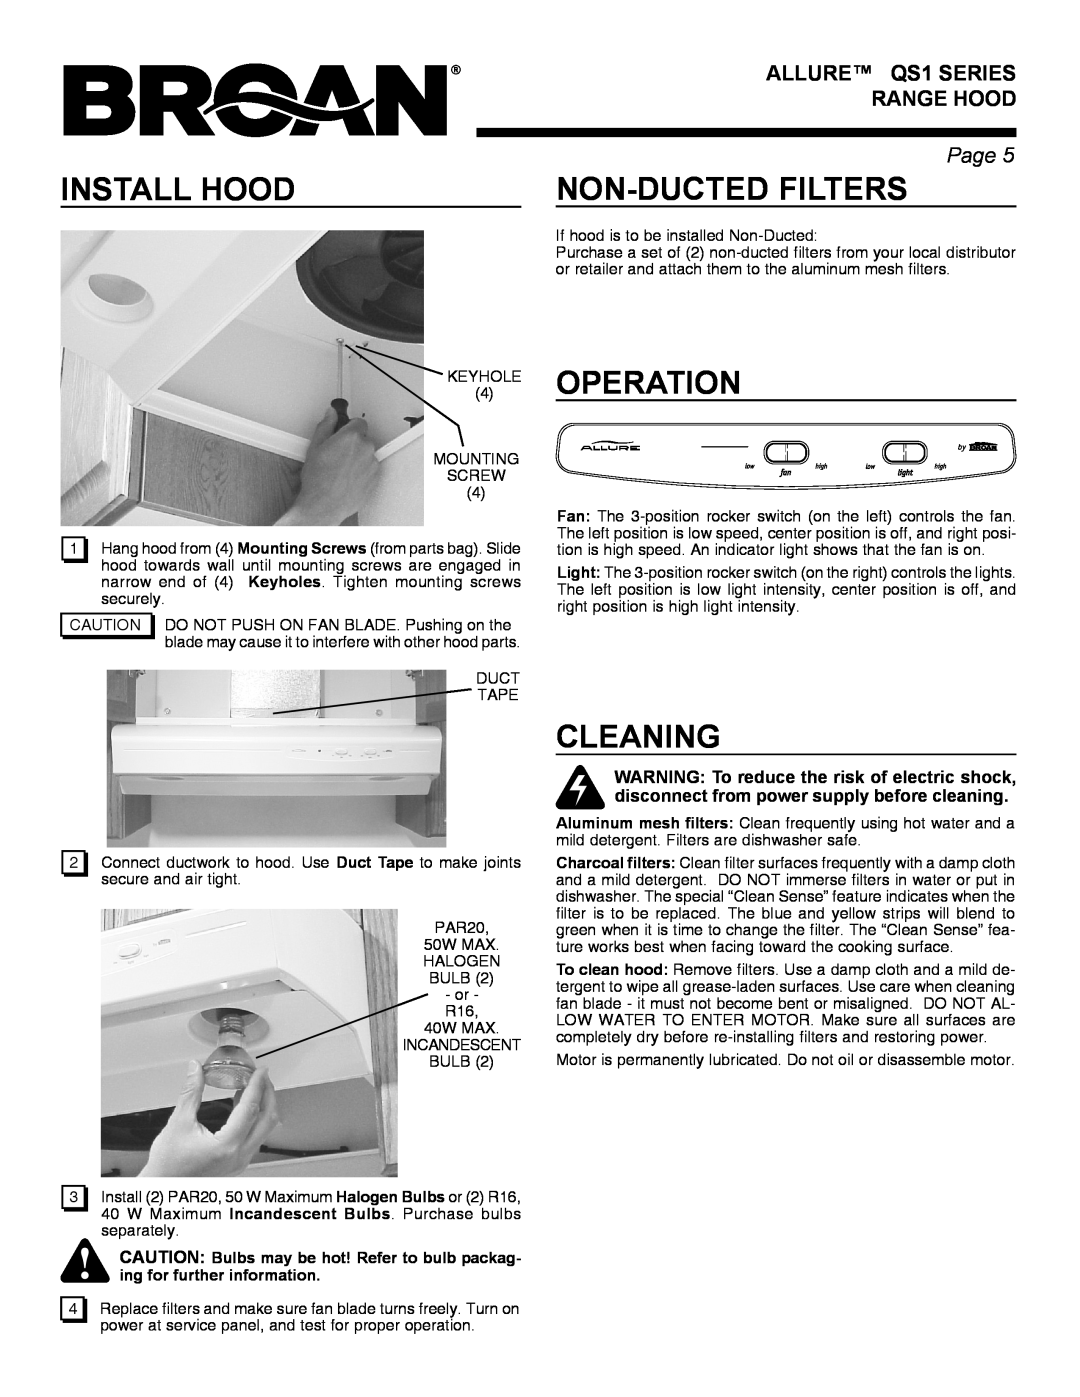 Broan warranty Install Hood, Operation, Cleaning, Non-Ductedfilters, ALLURE QS1 SERIES, Range Hood, Page 